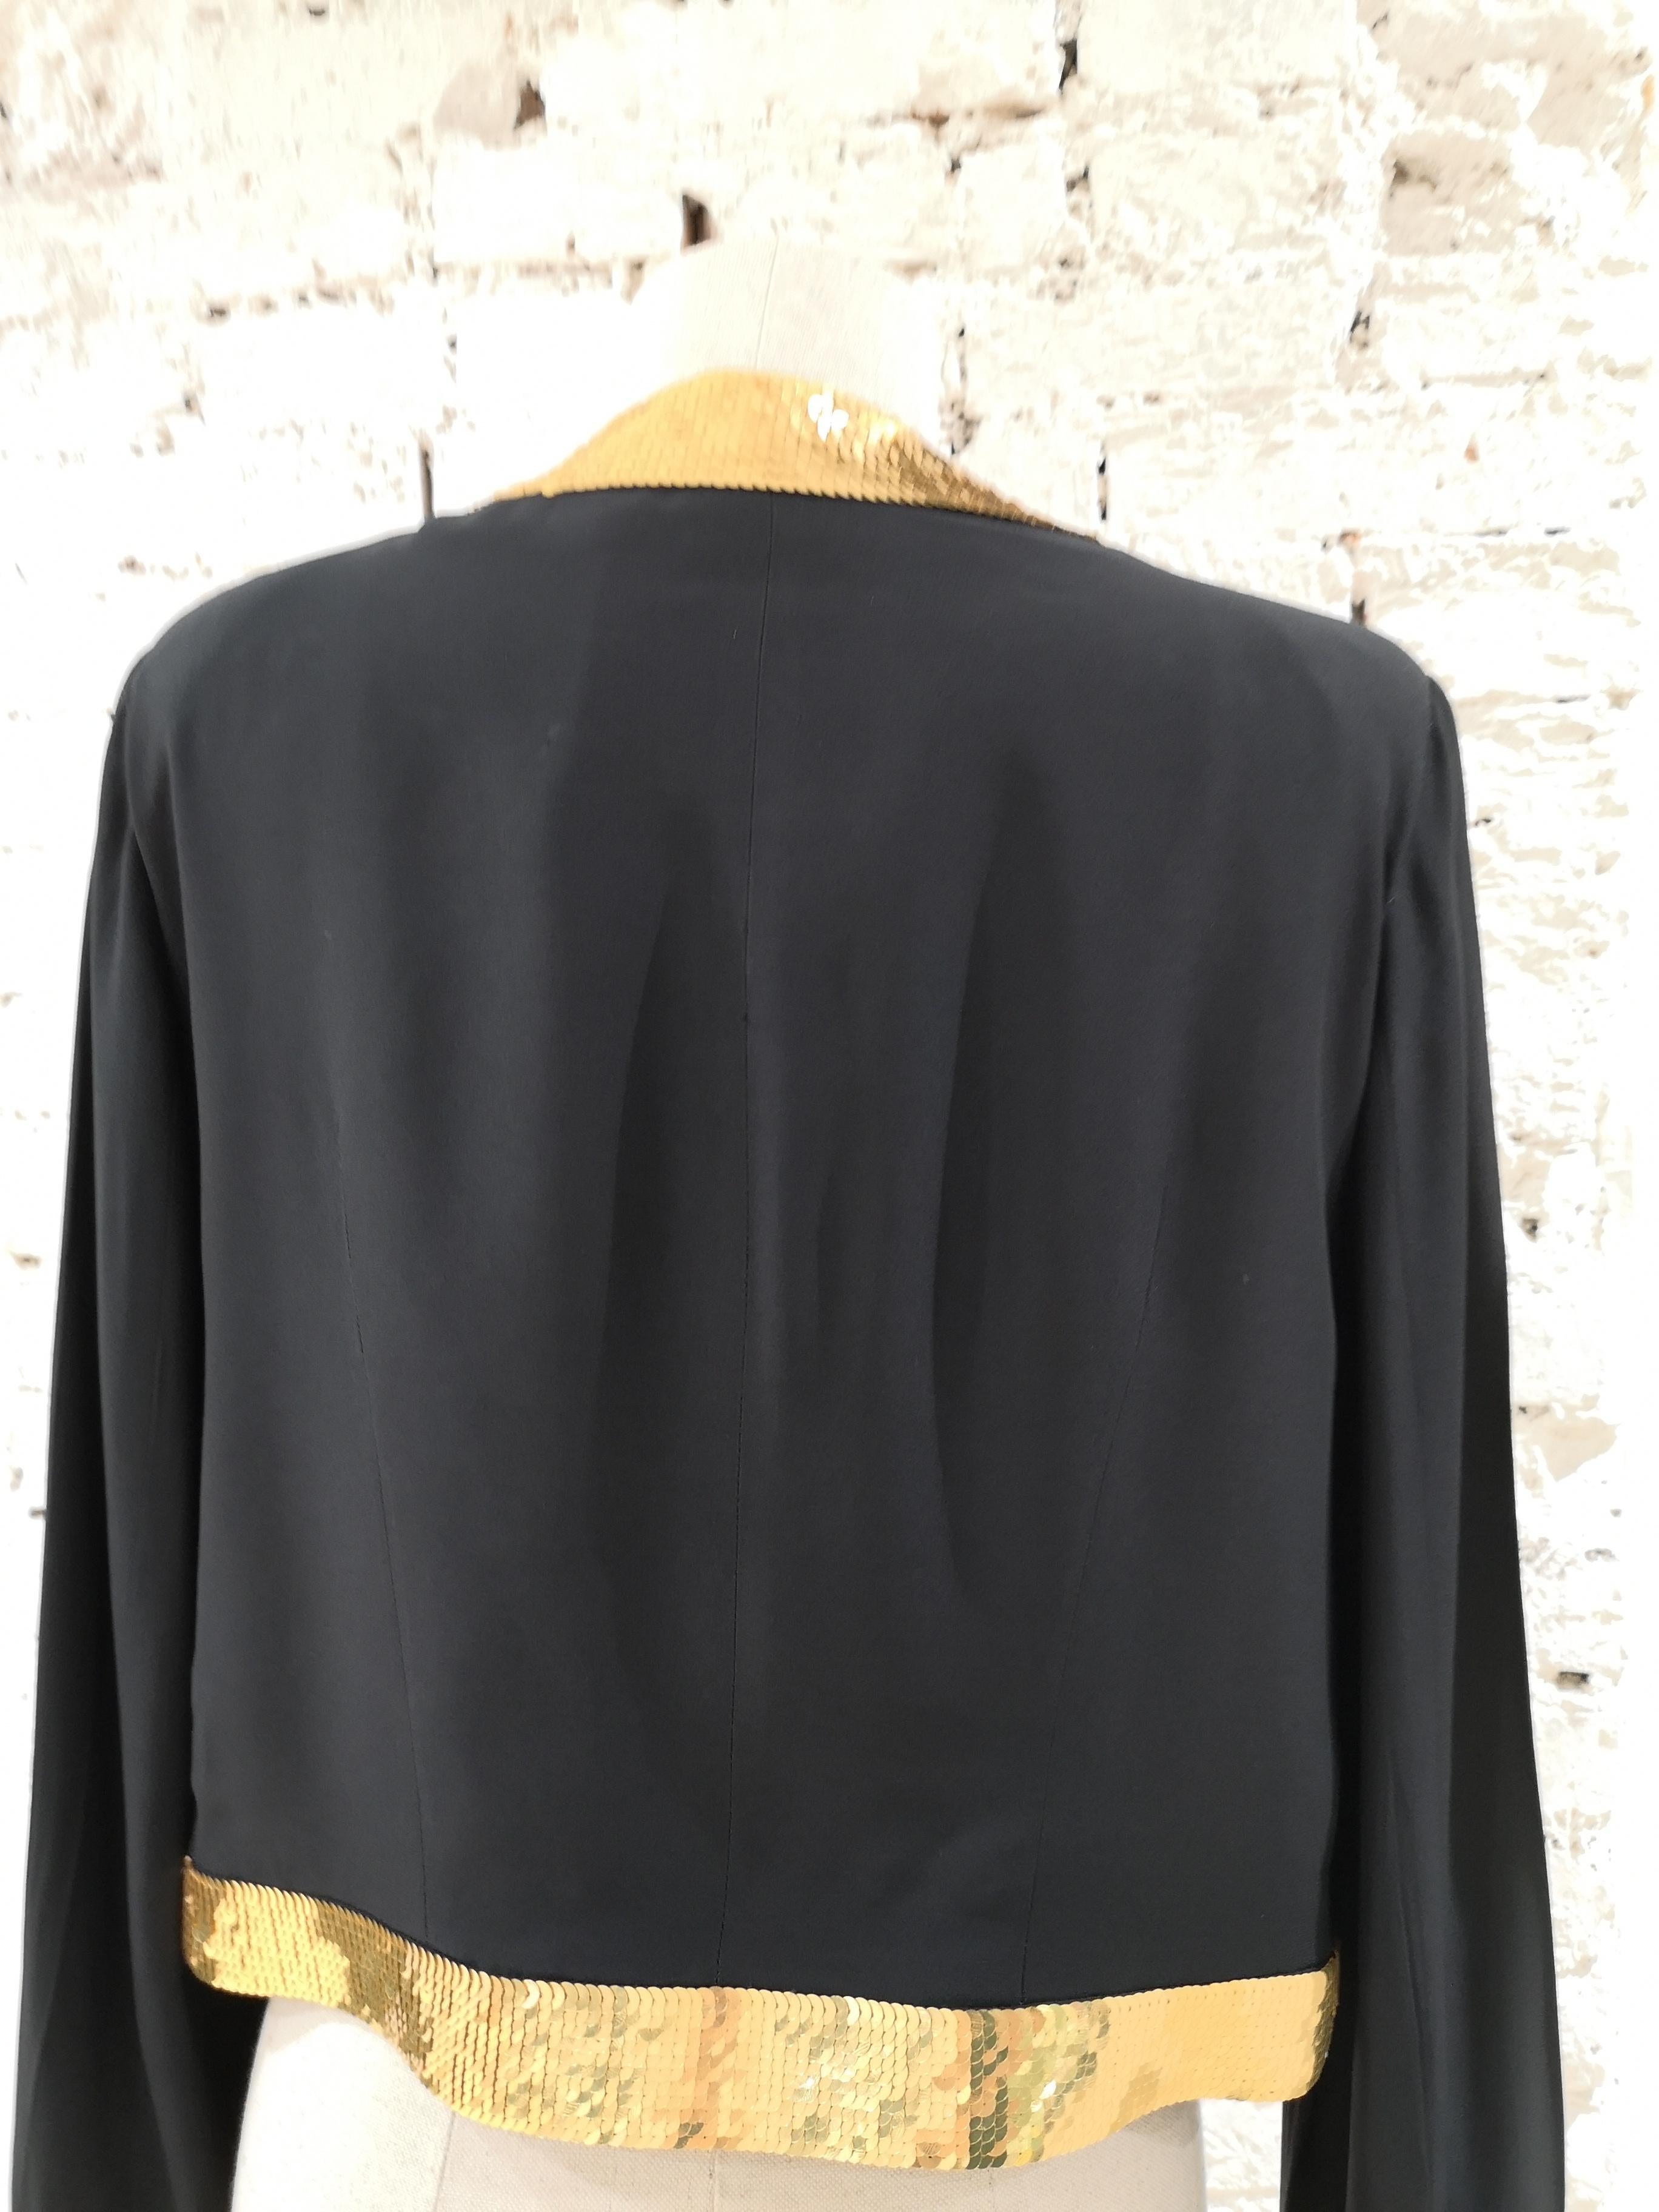 Moschino Wool Black Jacket Gold Sequins 3